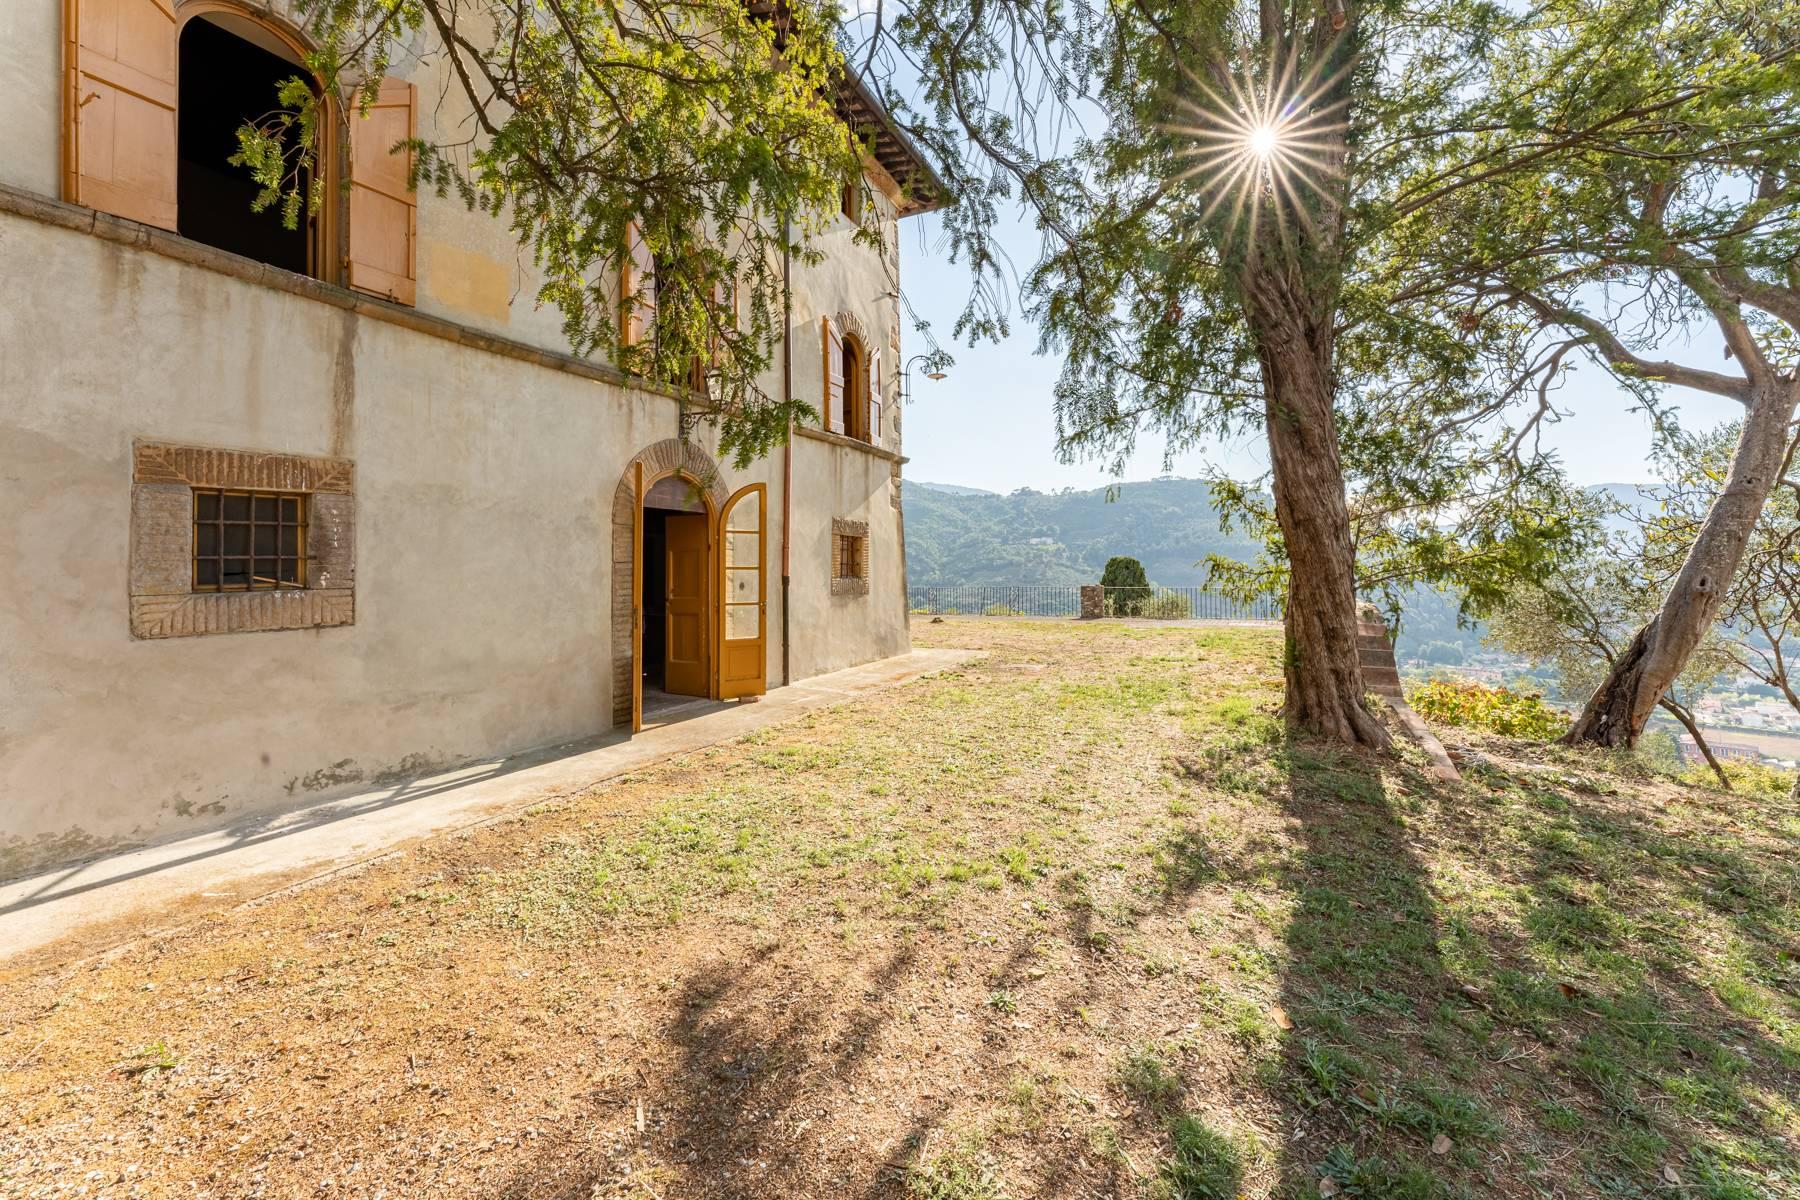 Superb villa with breathtaking views of the Lucca countryside - 3